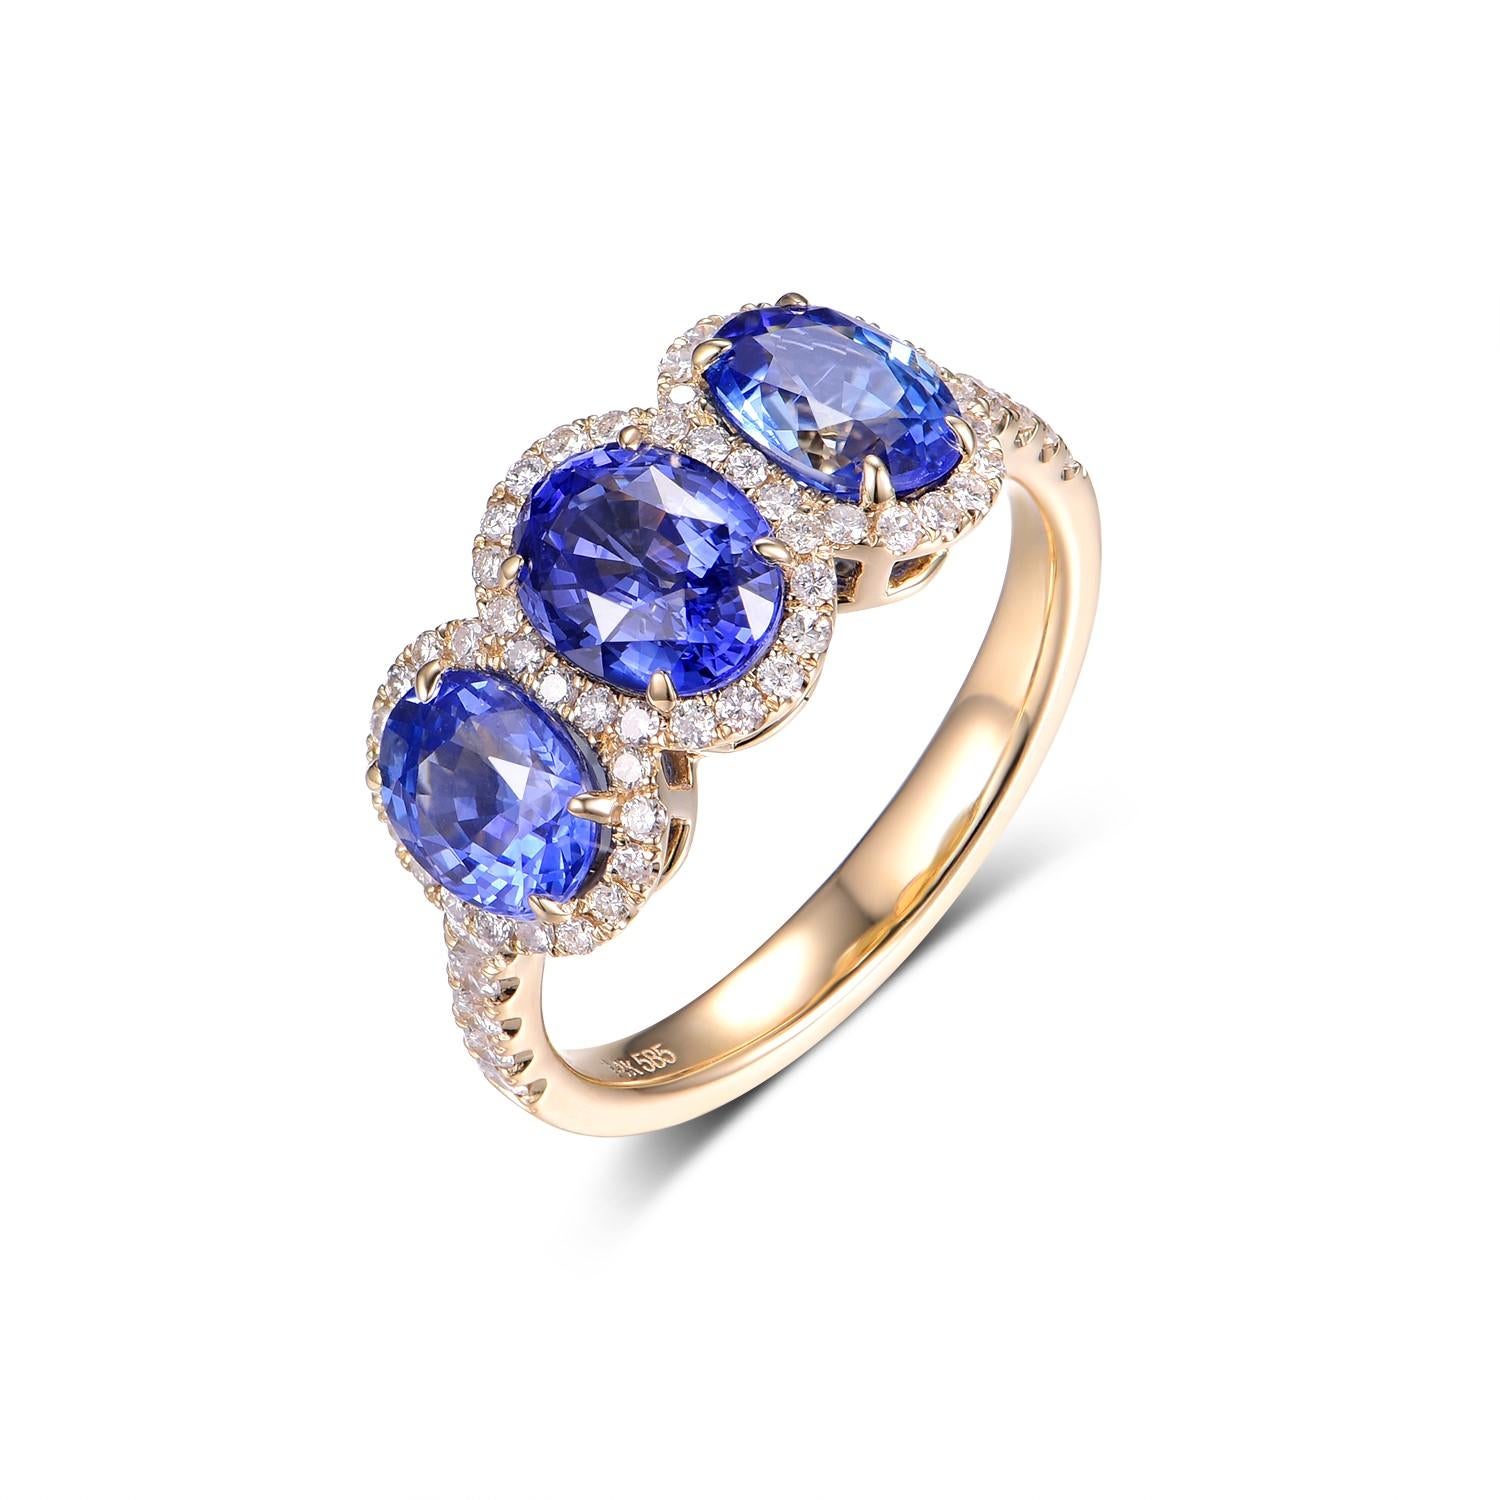 Unveiling a timeless elegance perfect for daily wear, this ring effortlessly marries simplicity with luxury. Nestled within a setting of luminous 14 karat yellow gold are three resplendent blue sapphires, with a combined weight of 3.31 carats. These